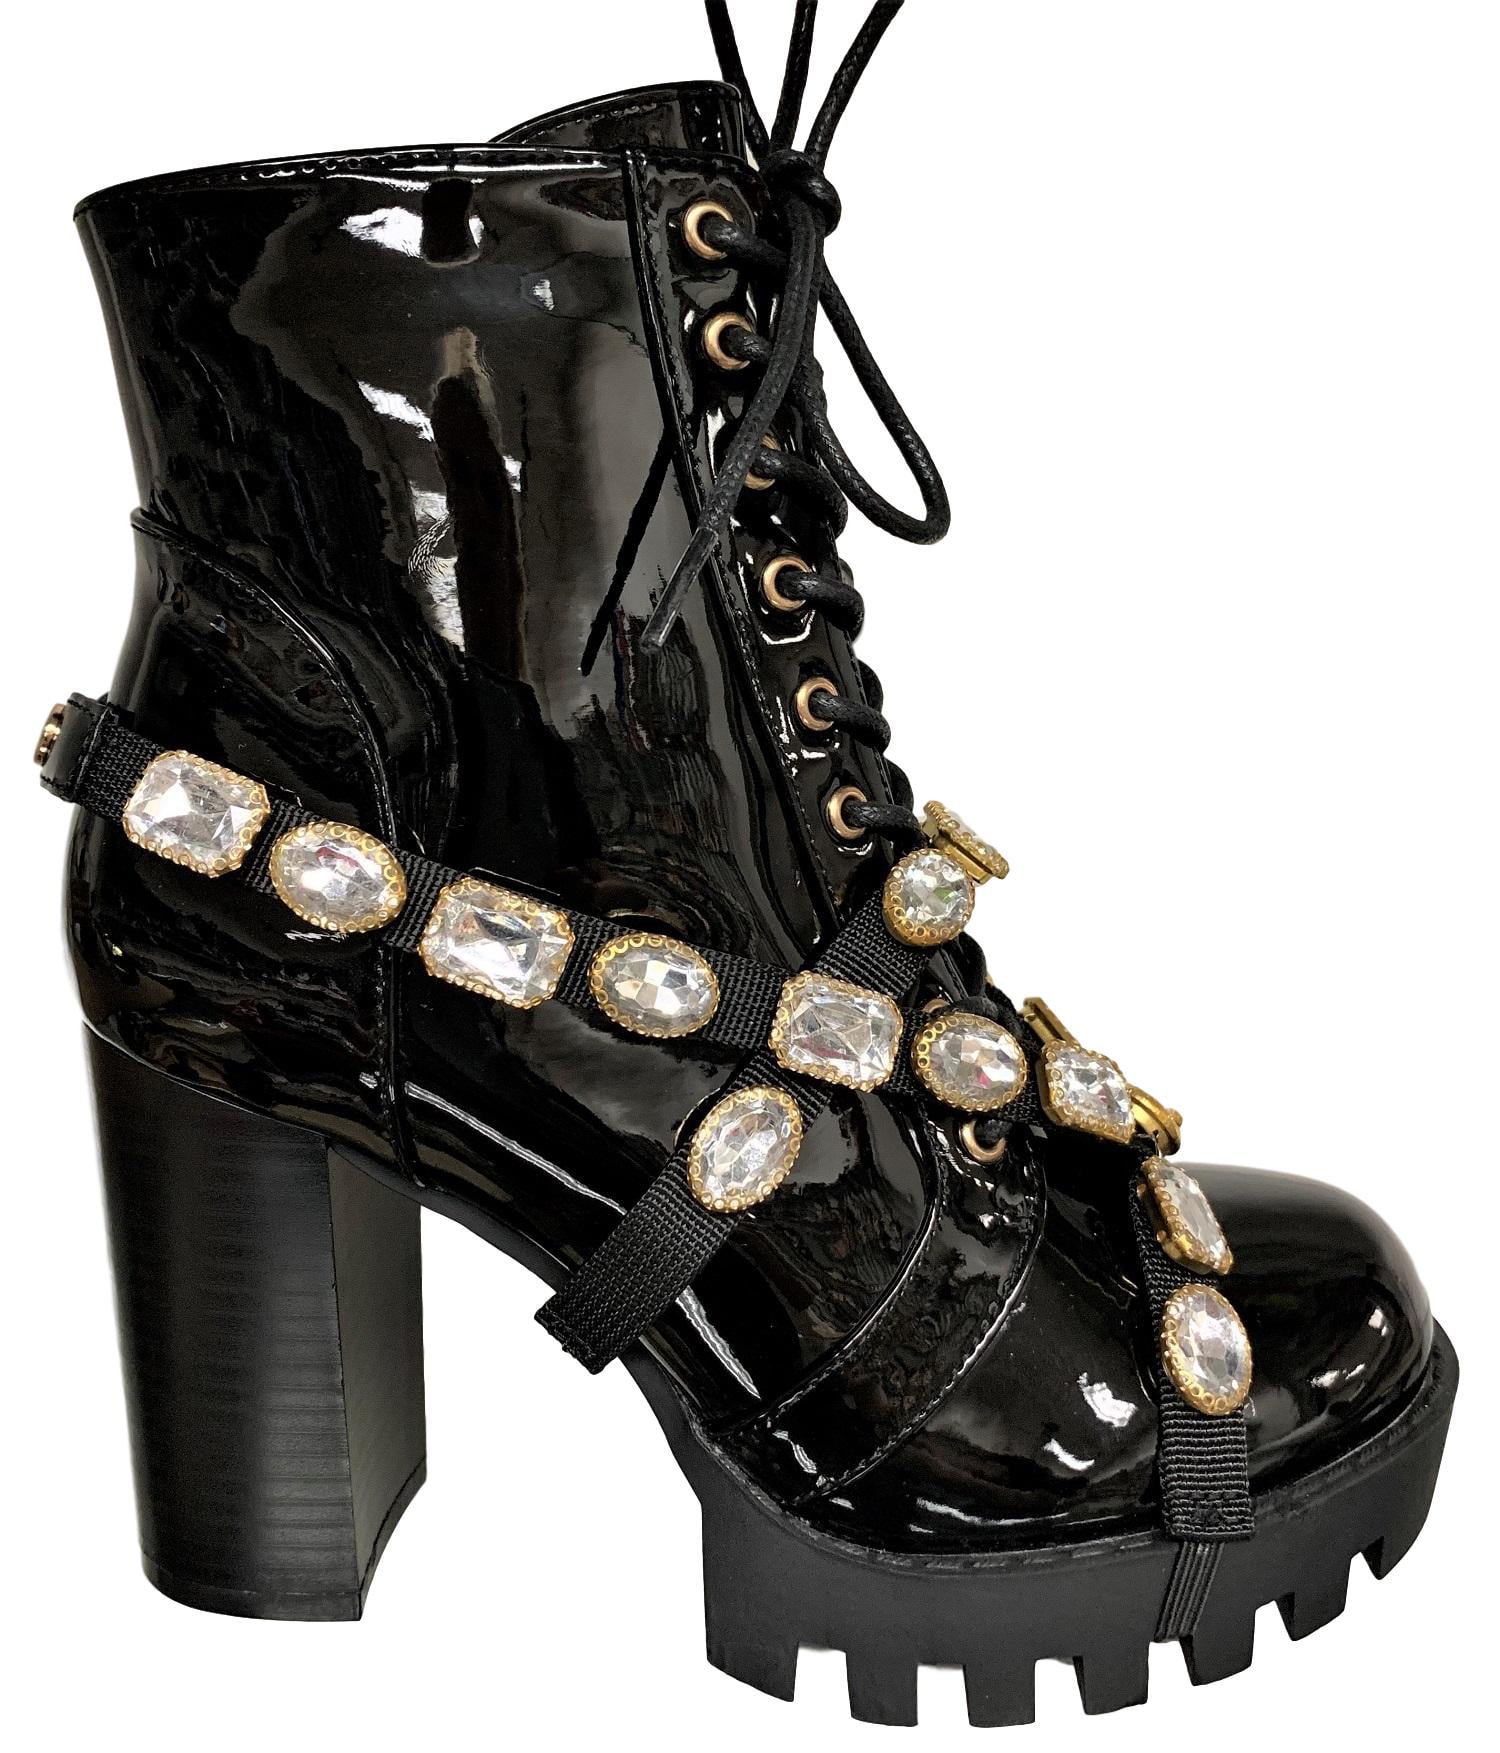 Glenna-12 Women Ankle Combat Military Fashion Booties Boots Lace Up Zipper  Jewels Bling Lug Sole Platform Black Patent